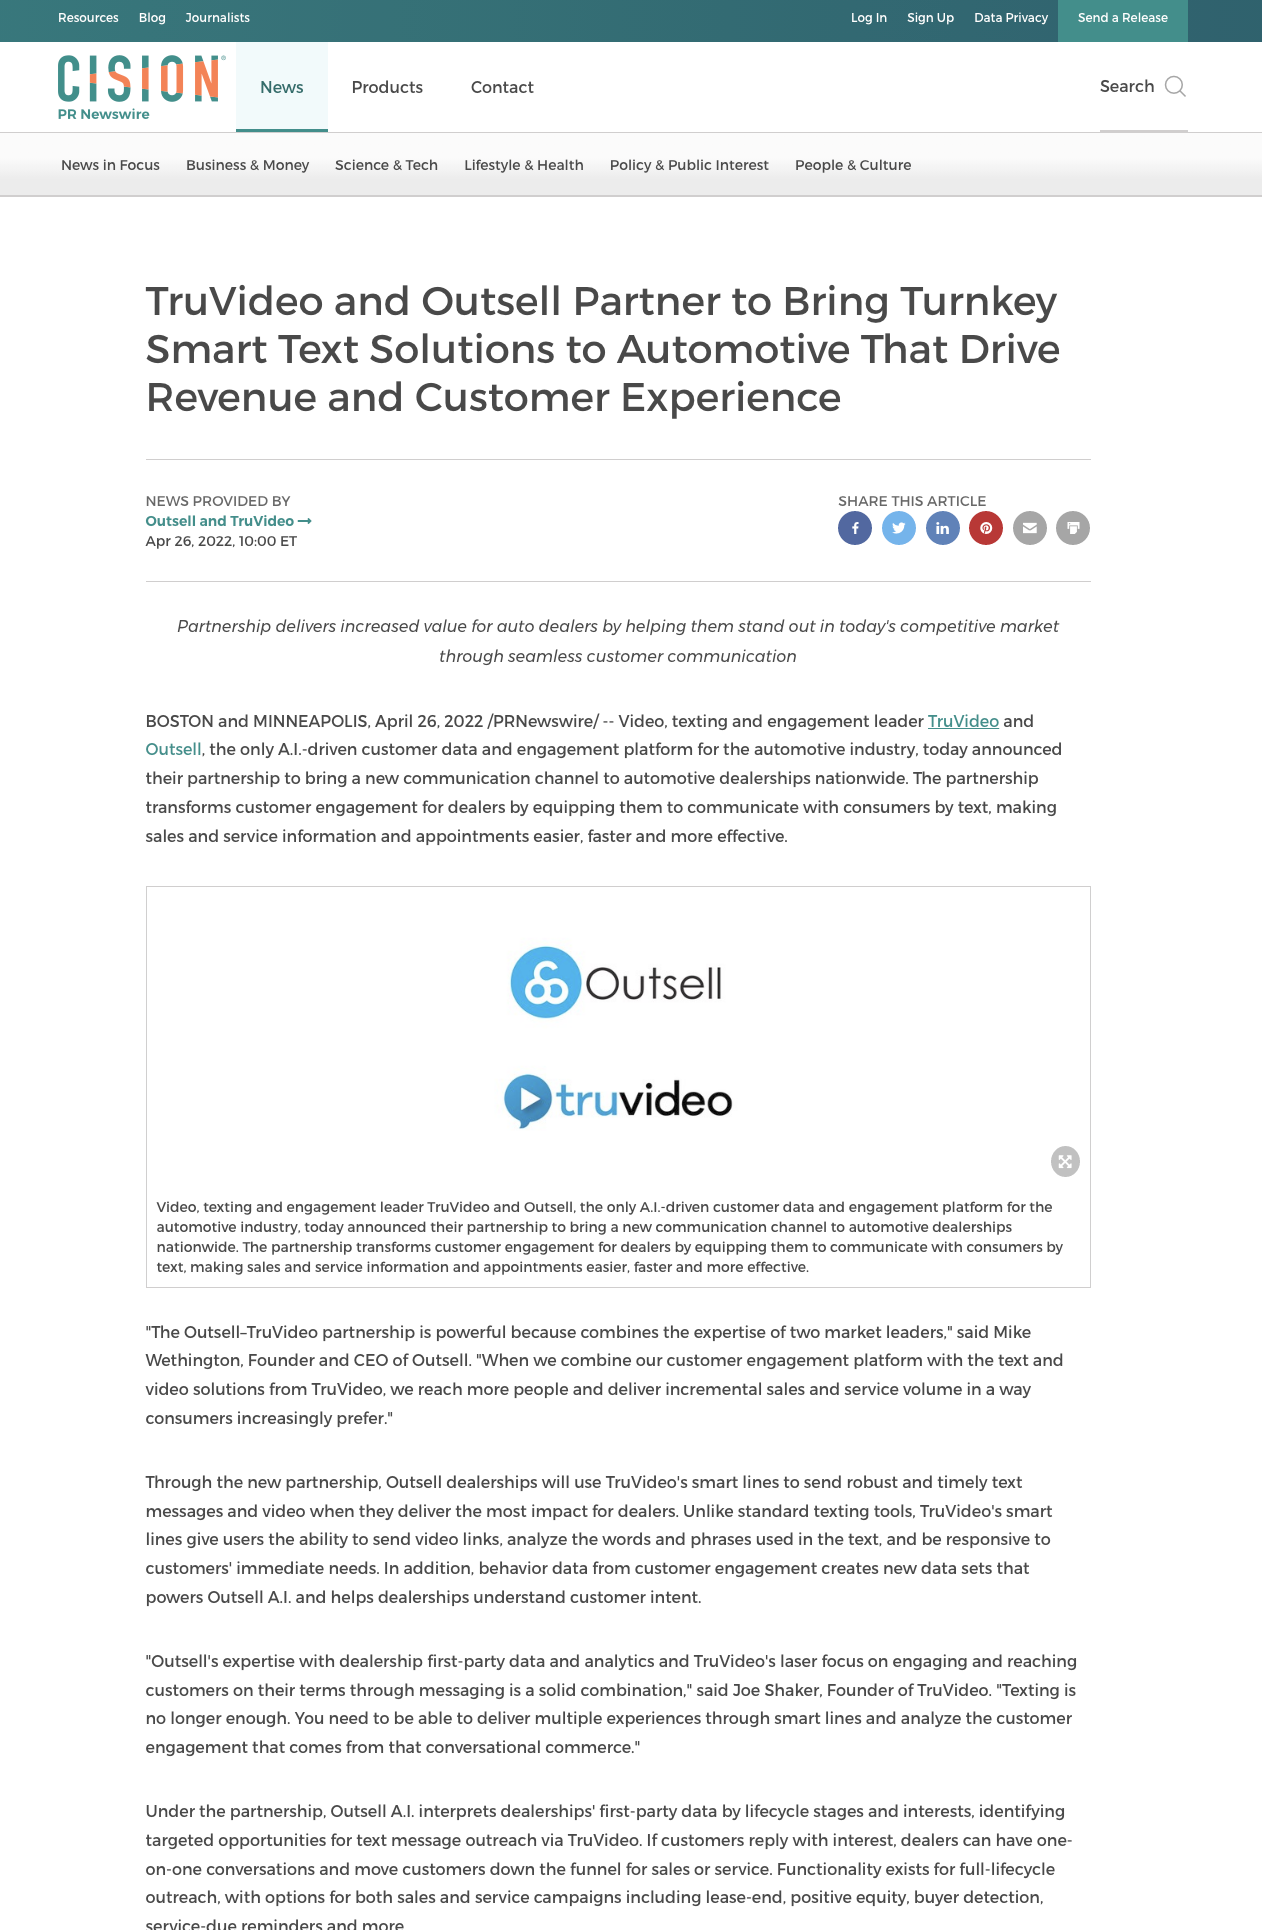 outsell truvideo news partnership